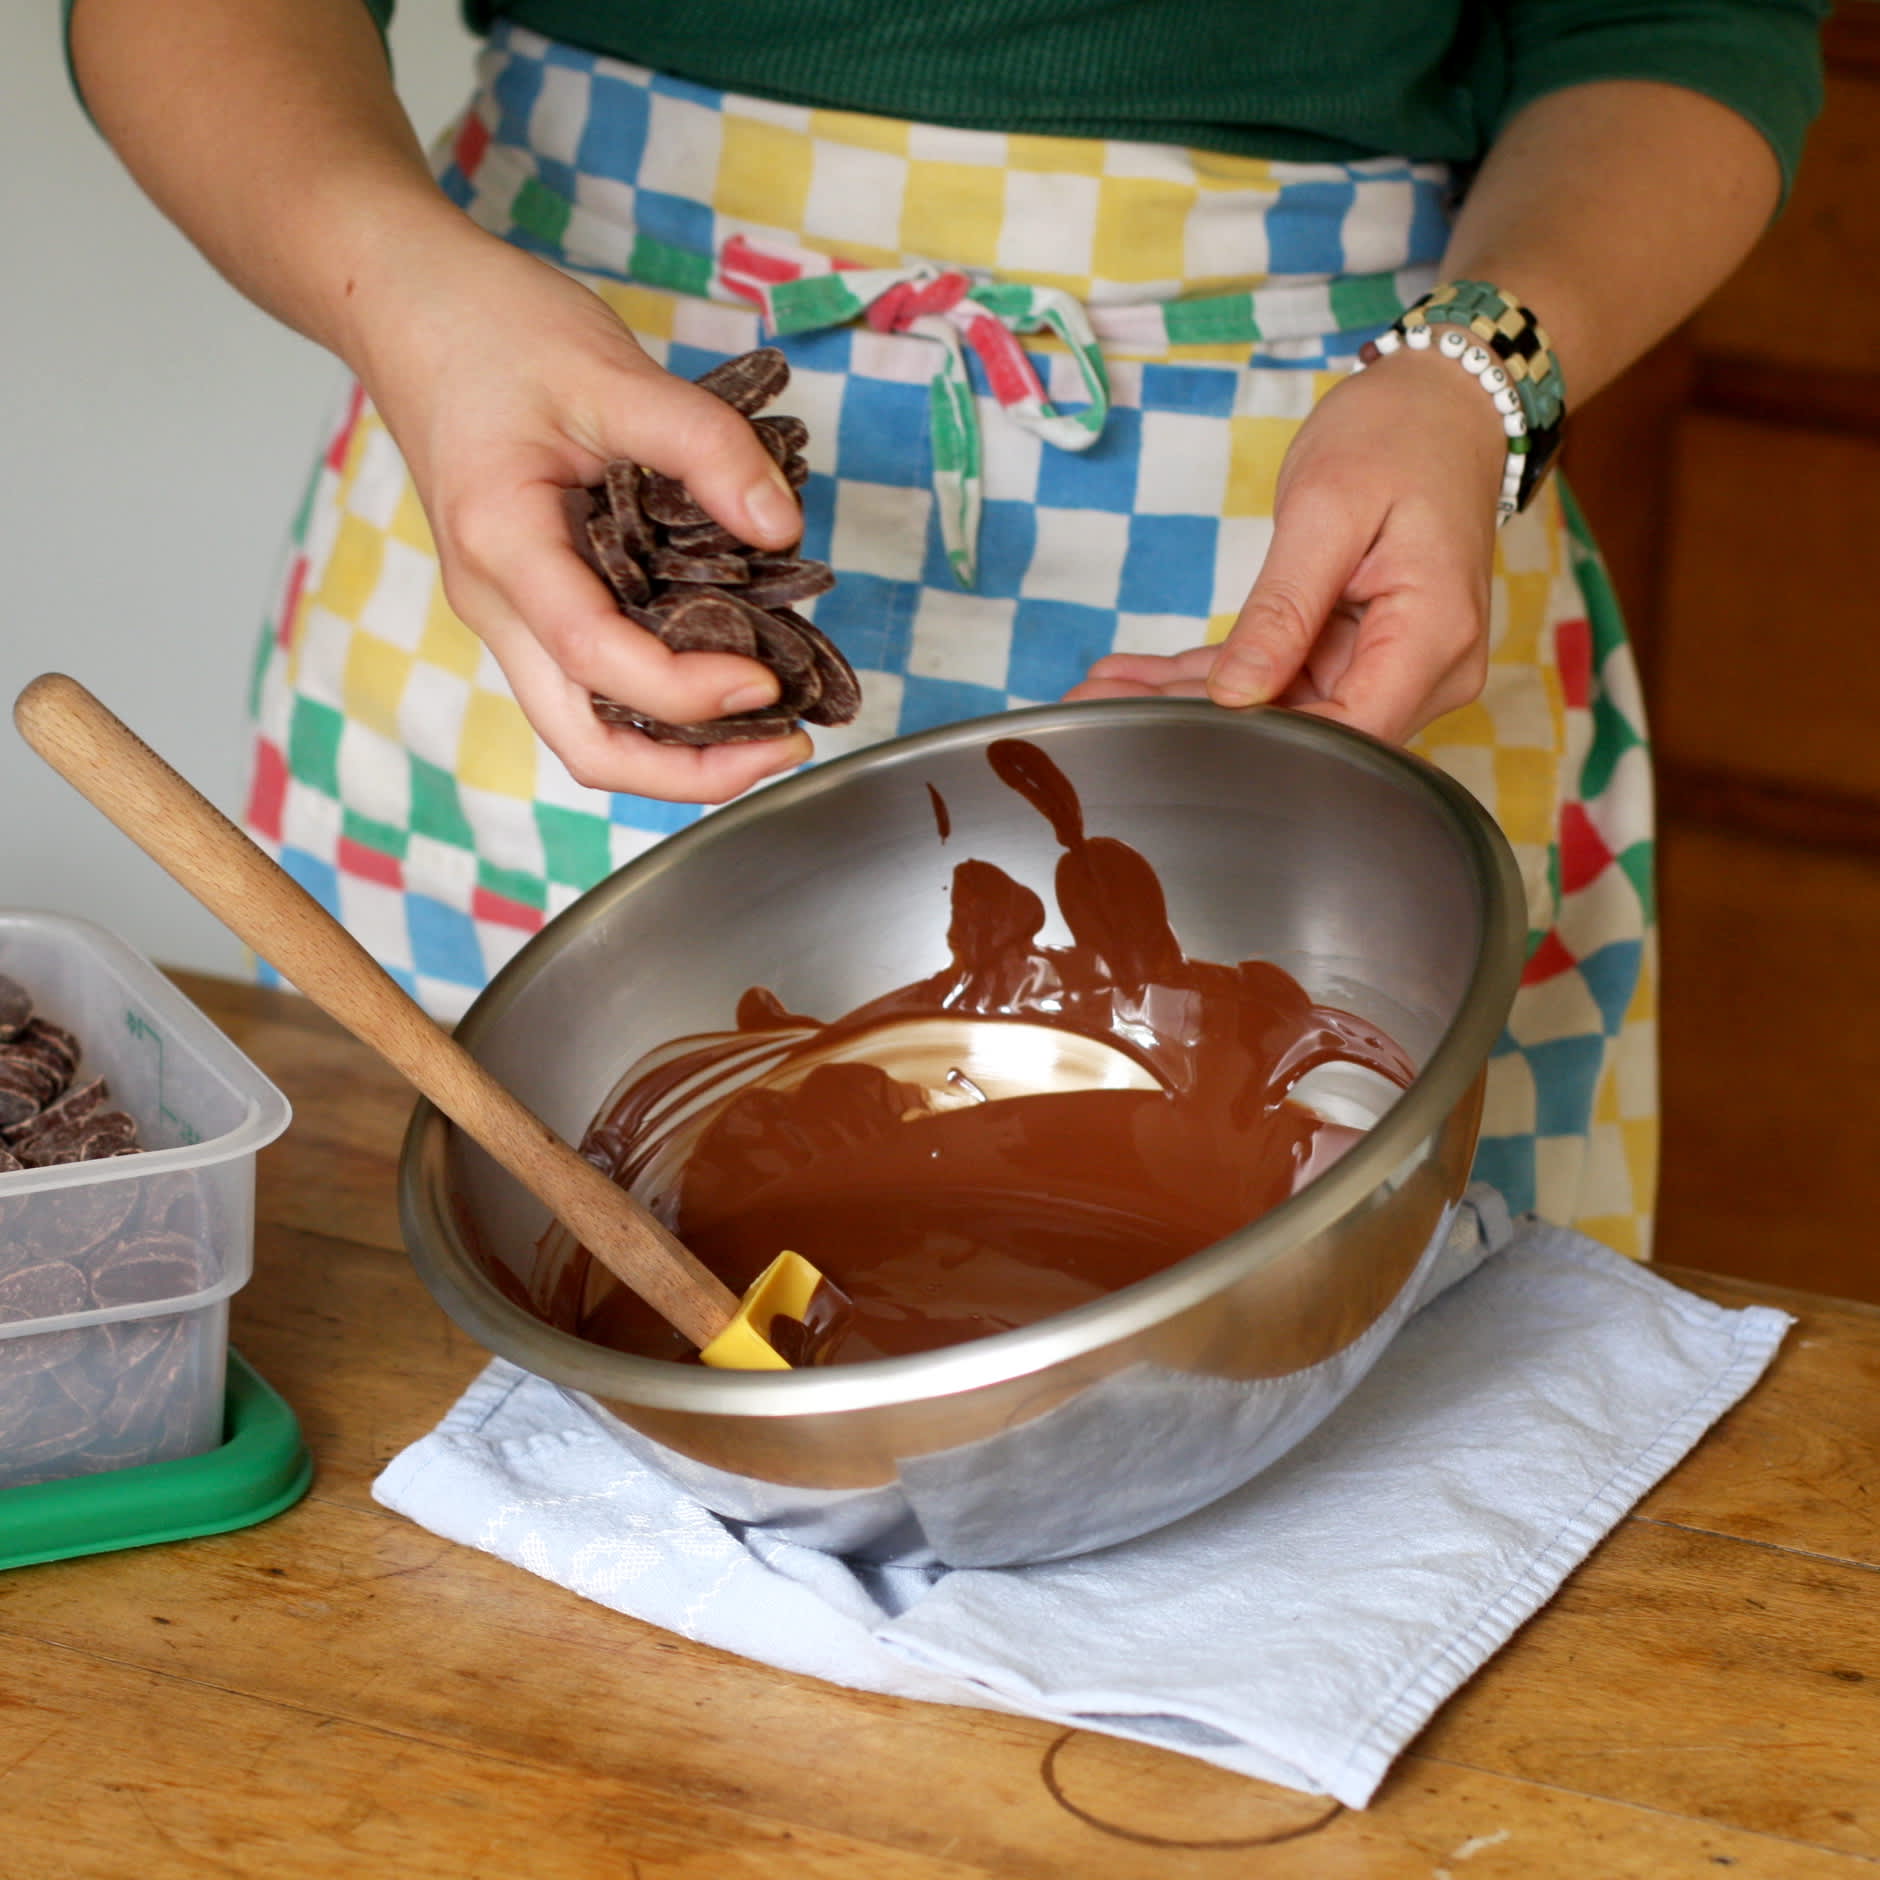 How to Temper Chocolate for Candy Making